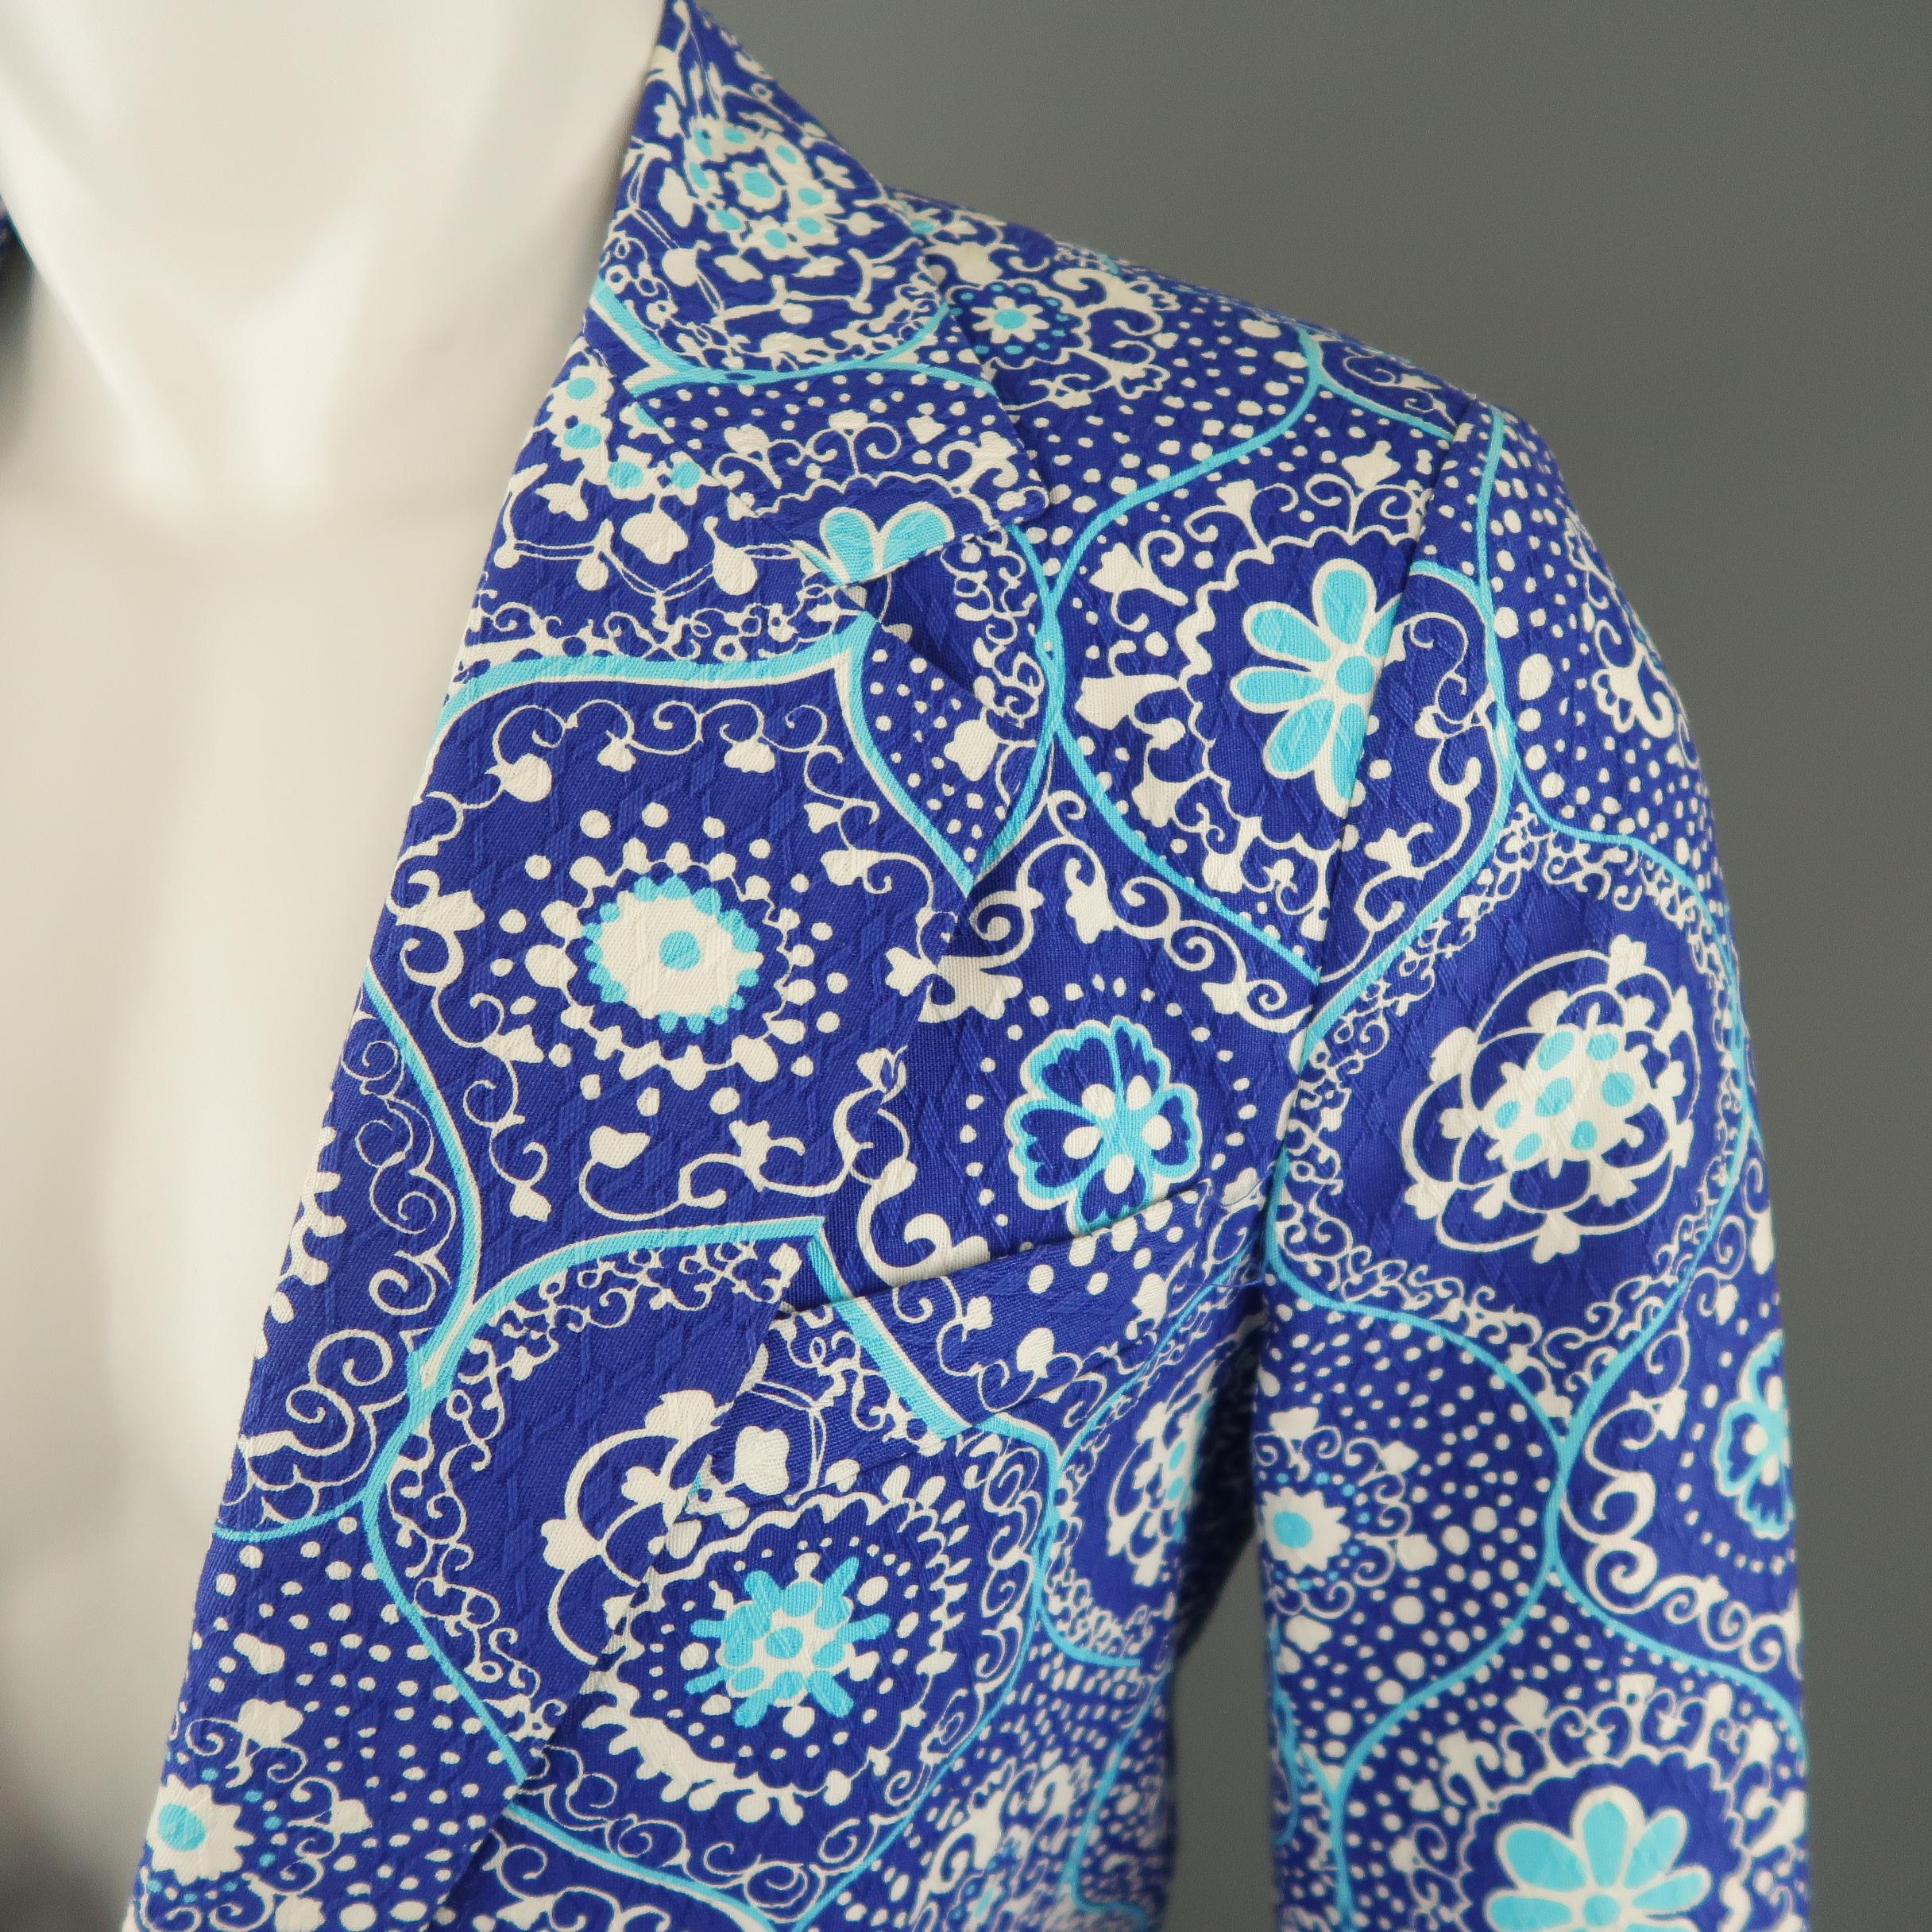 TRINA TURK sport coat comes in abstract blue, turquoise and white floral print textured cotton with a wide notch lapel, single breasted, two button front, and patch pockets. With tags. Made in USA.
 
Excellent Pre-Owned Condition.
Marked: 38
